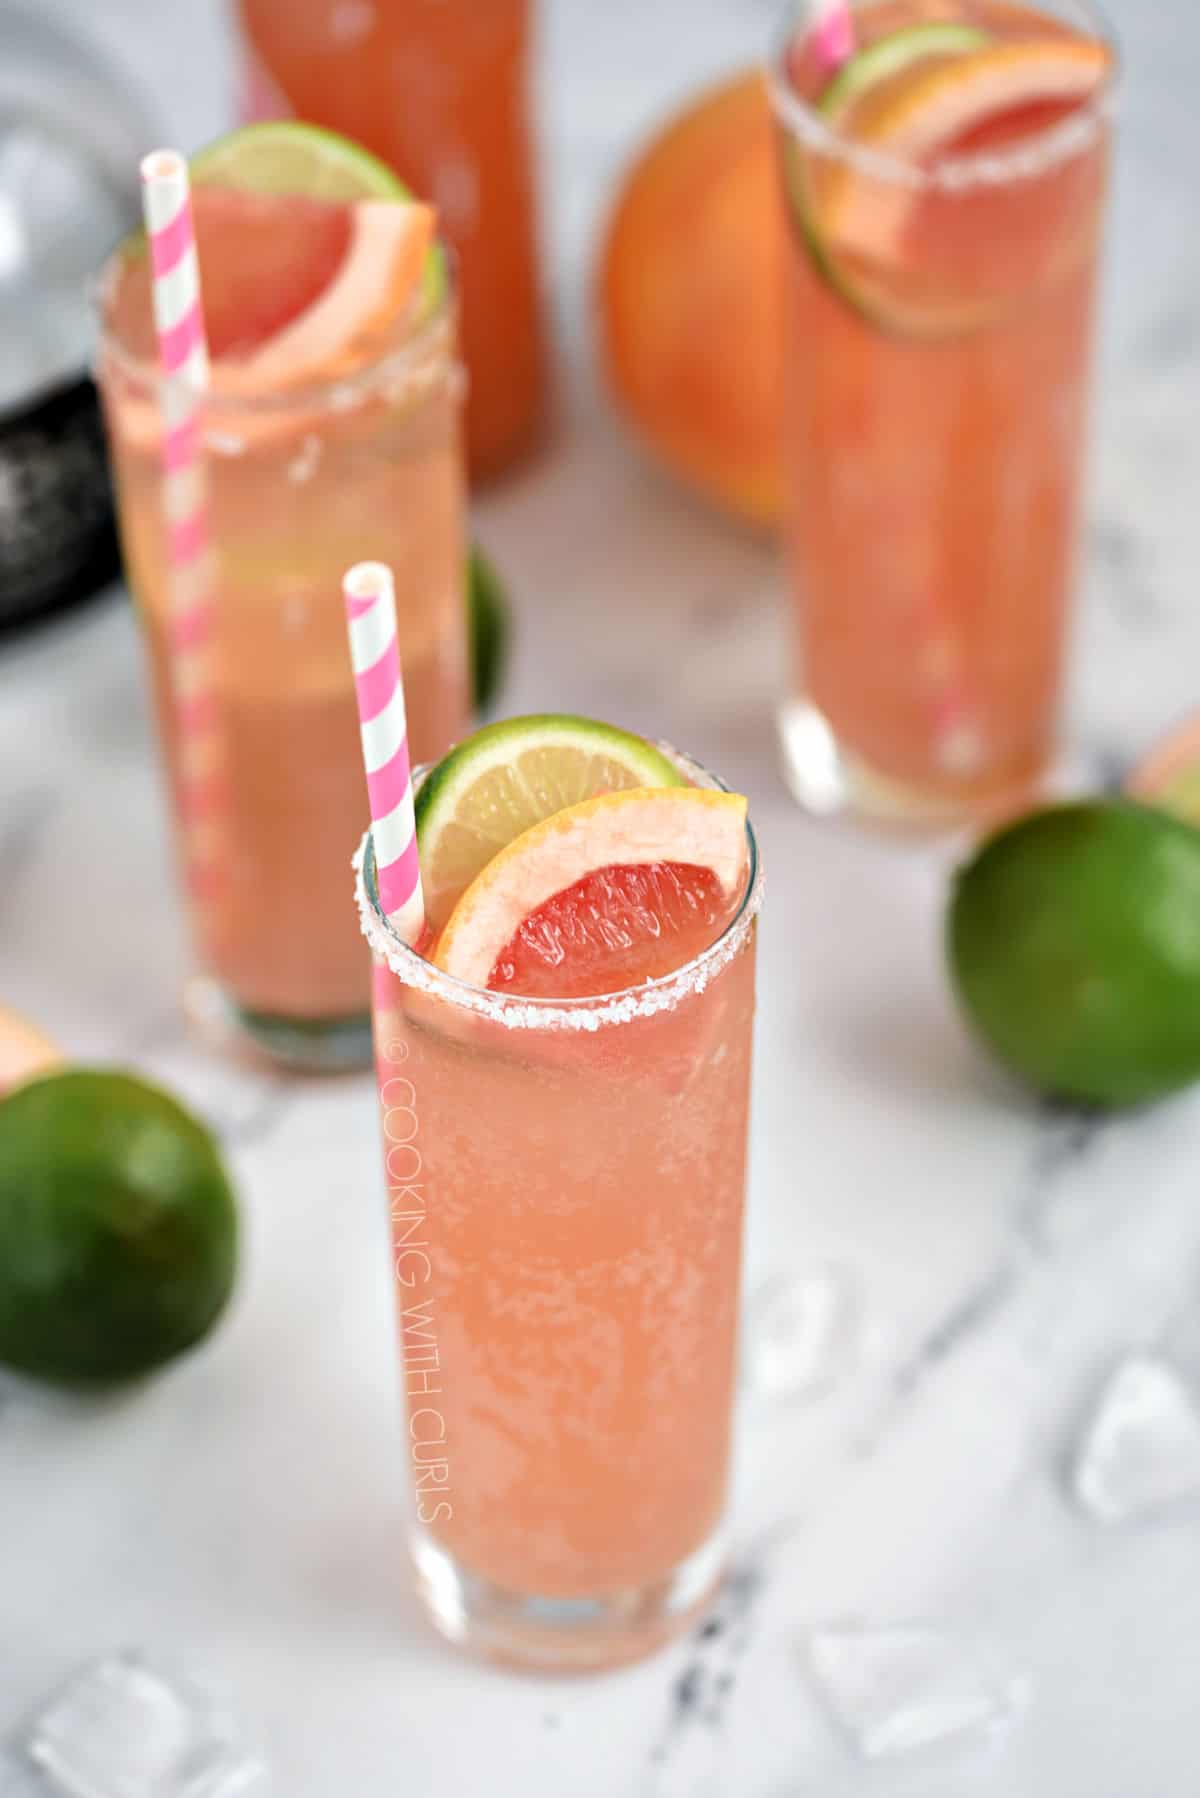 Three bubbly, pink cocktails in tall glasses garnished with a slice of lime and grapefruit with a pink and white striped straw.